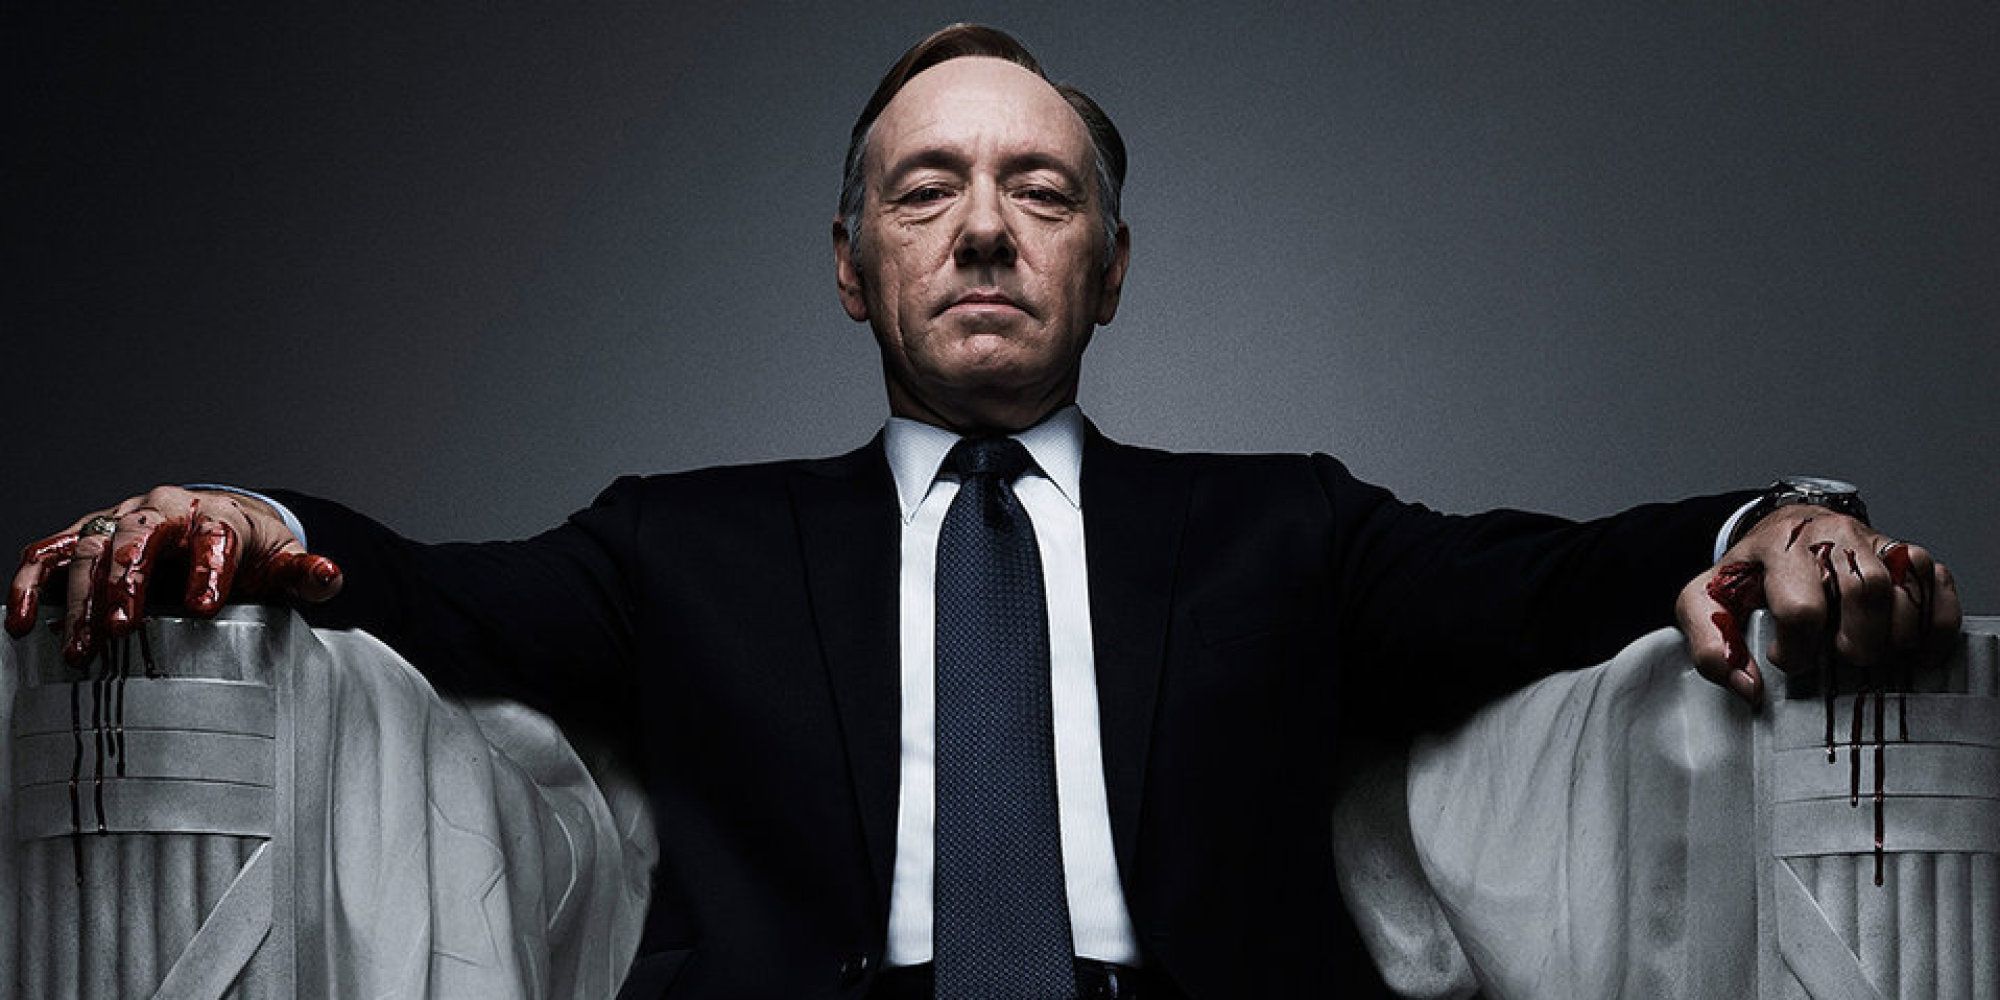 Kevin Spacey as Frank Underwood in House of Cards